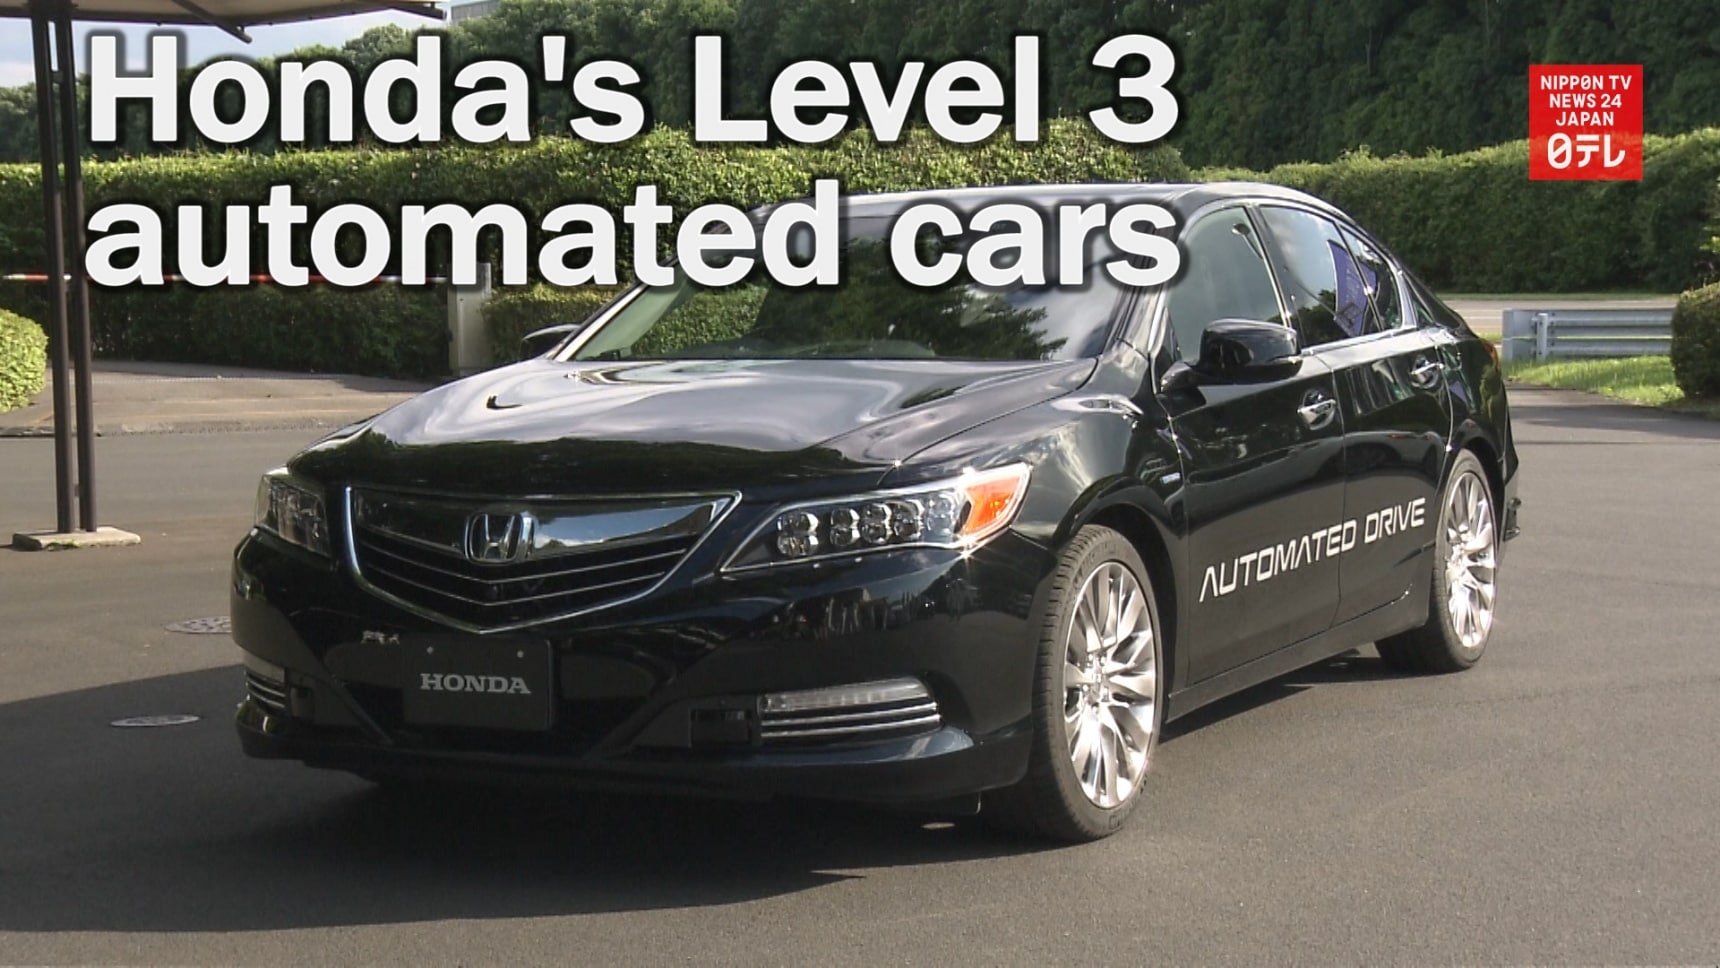 Honda to Sell World 1st Level 3 Automated Car